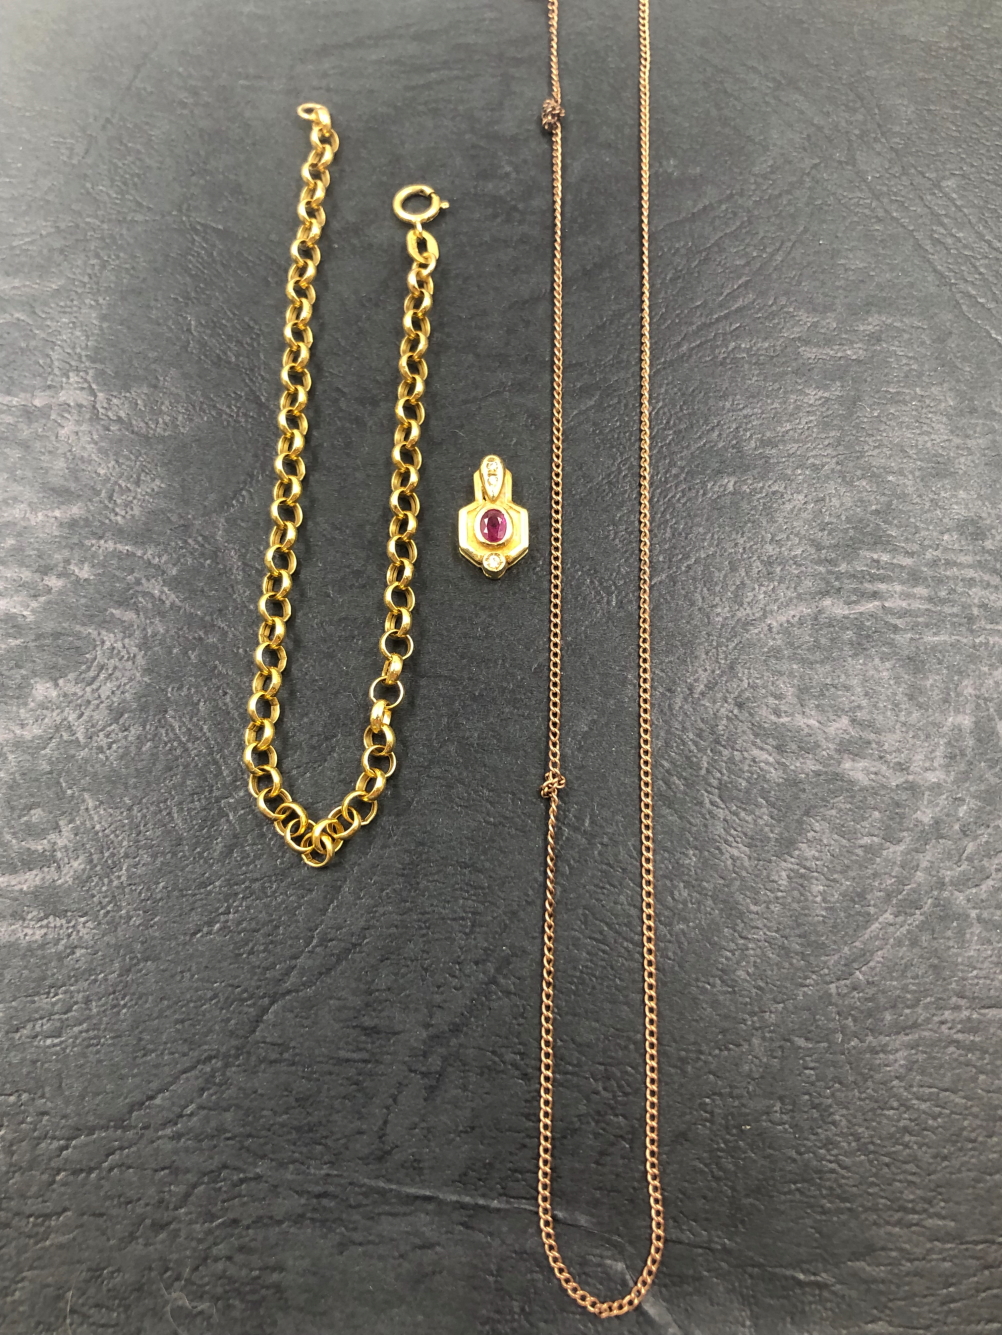 AN 18ct GOLD RUBY AND DIAMOND PENDANT, TOGETHER WITH A 9ct ROSE GOLD PENDANT CHAIN AND A 9ct GOLD - Image 2 of 2